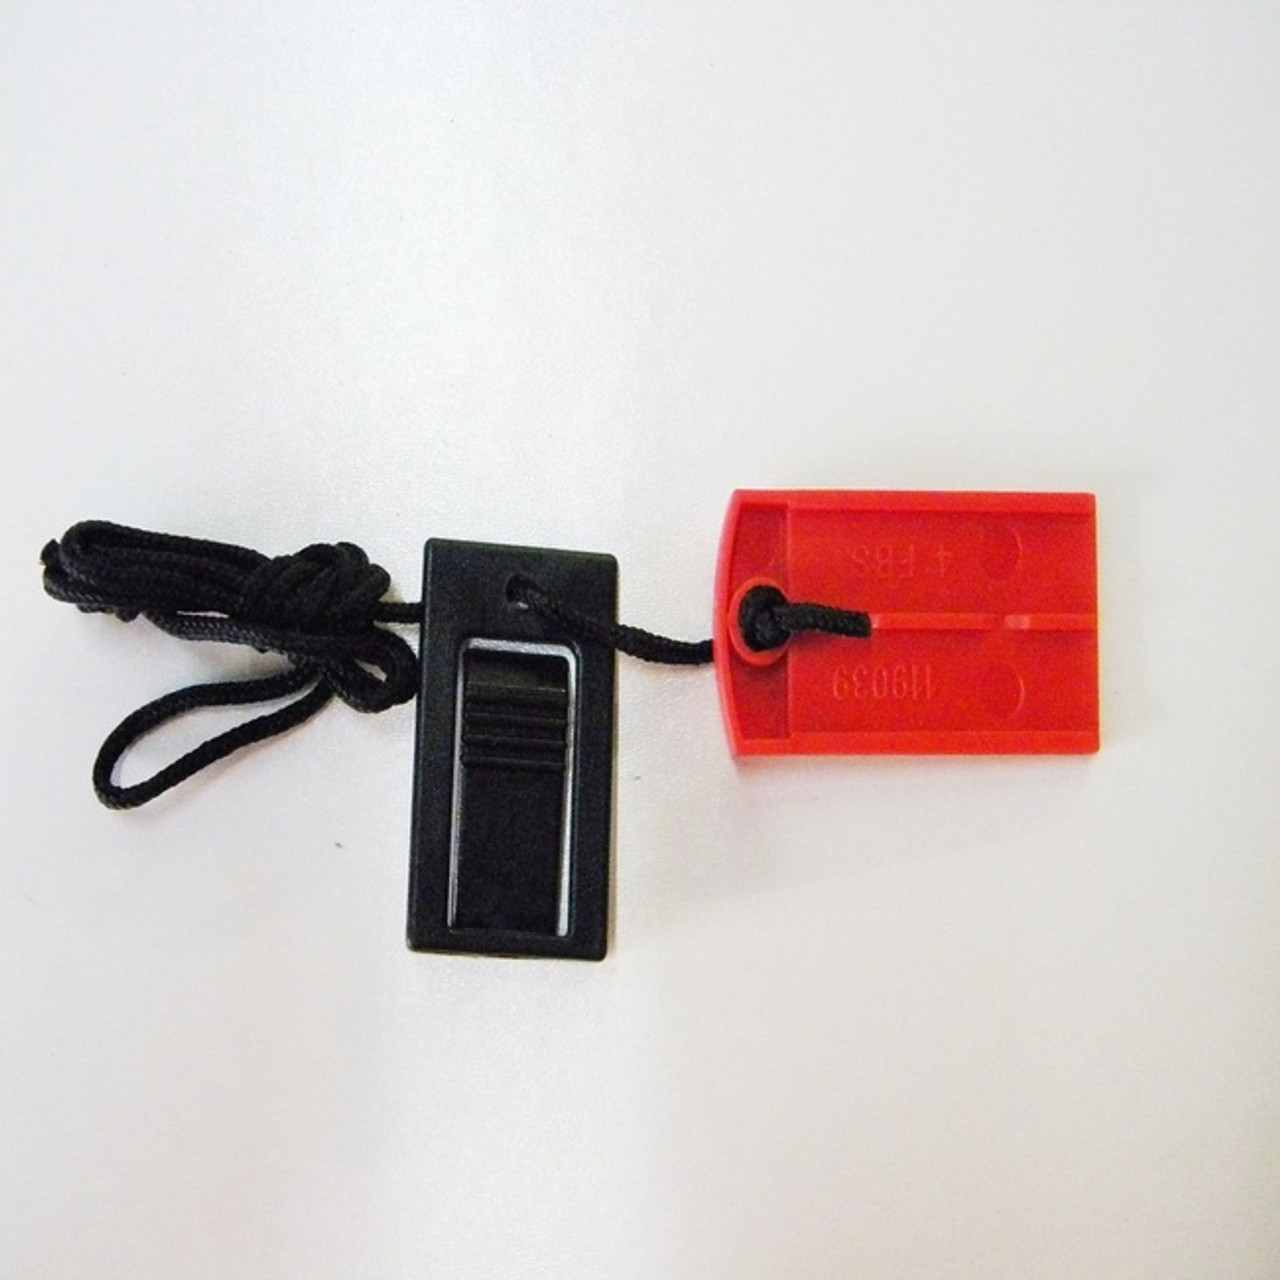 Sears Treadmill Safety Key Red Insert Part Number 119038